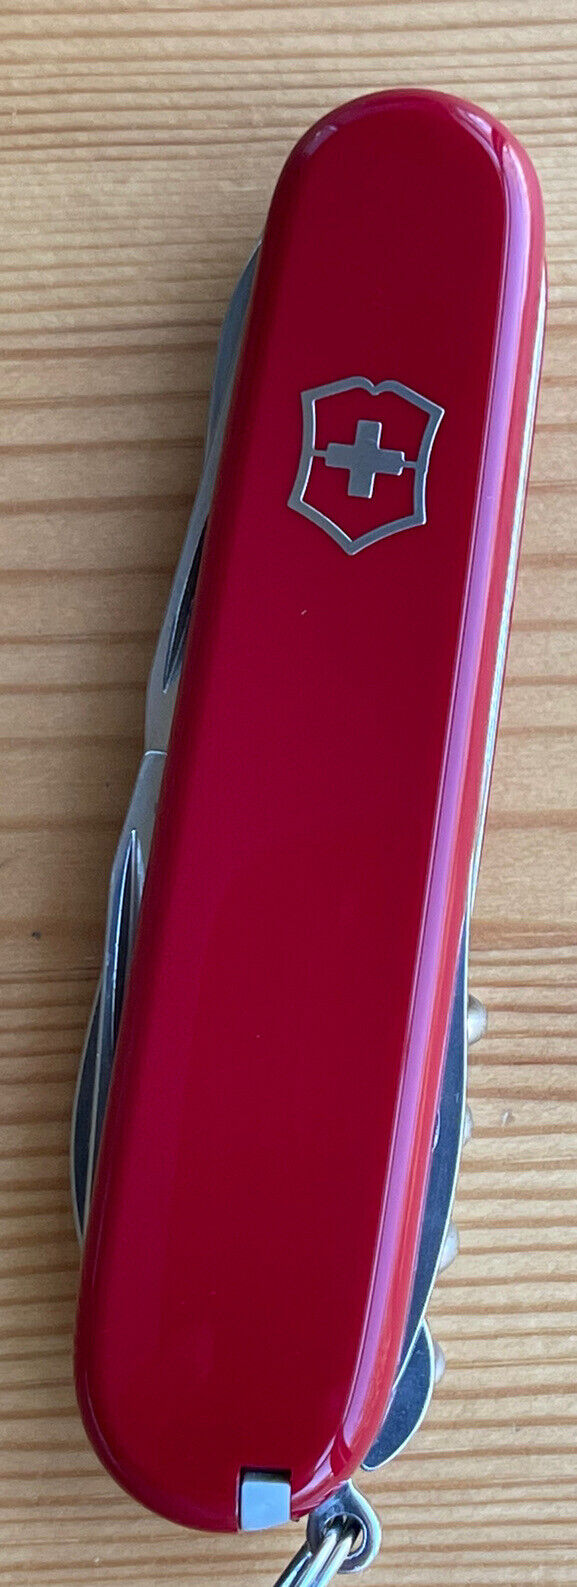 Victorinox HUNTSMAN Swiss Army Knife Great For Camping Shiny Handles Scales